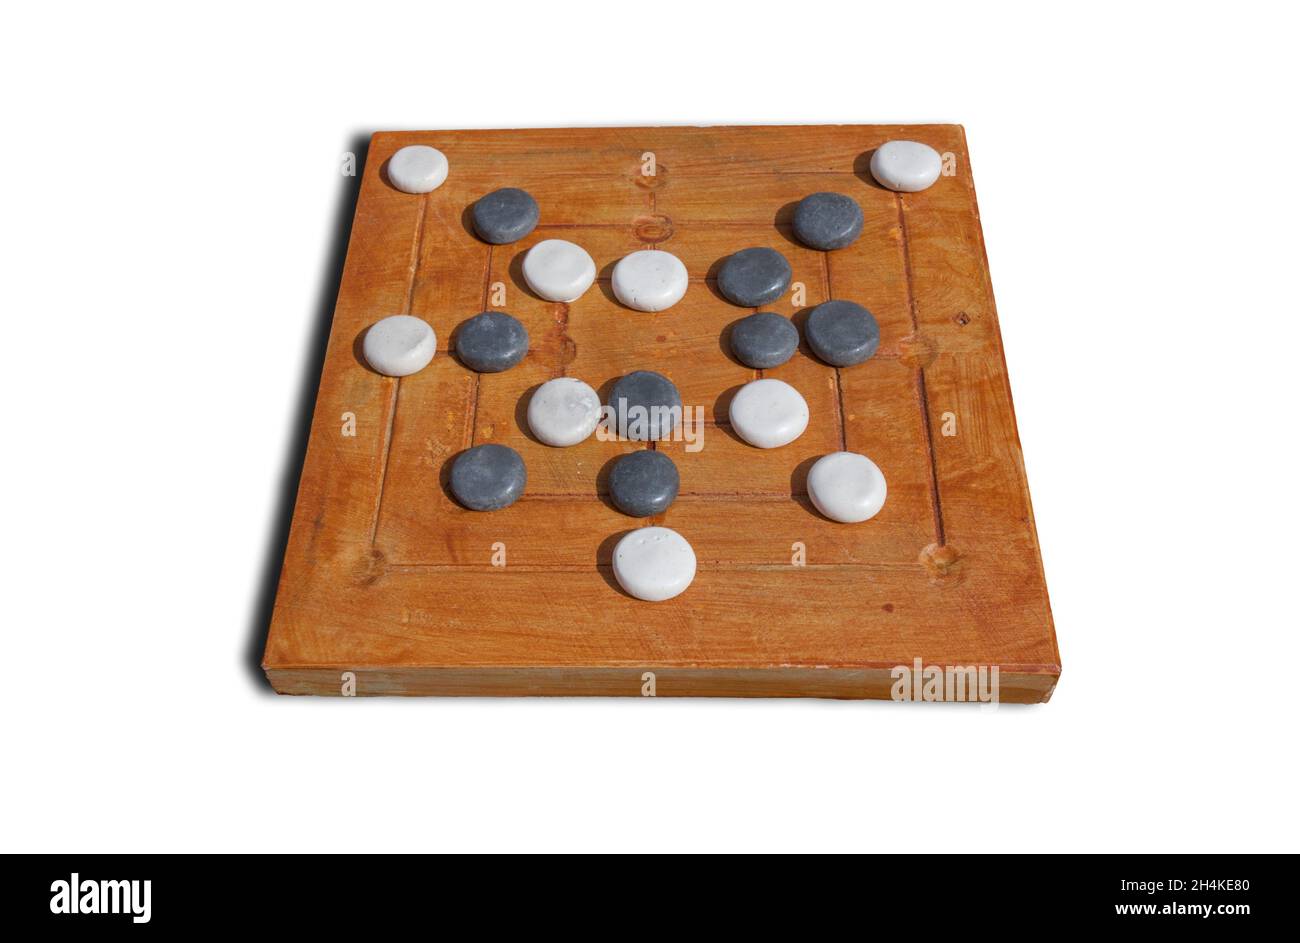 Reconstruction of roman board game Nine mens morris or mill game. Private recreational activity of ancient romans. Stock Photo